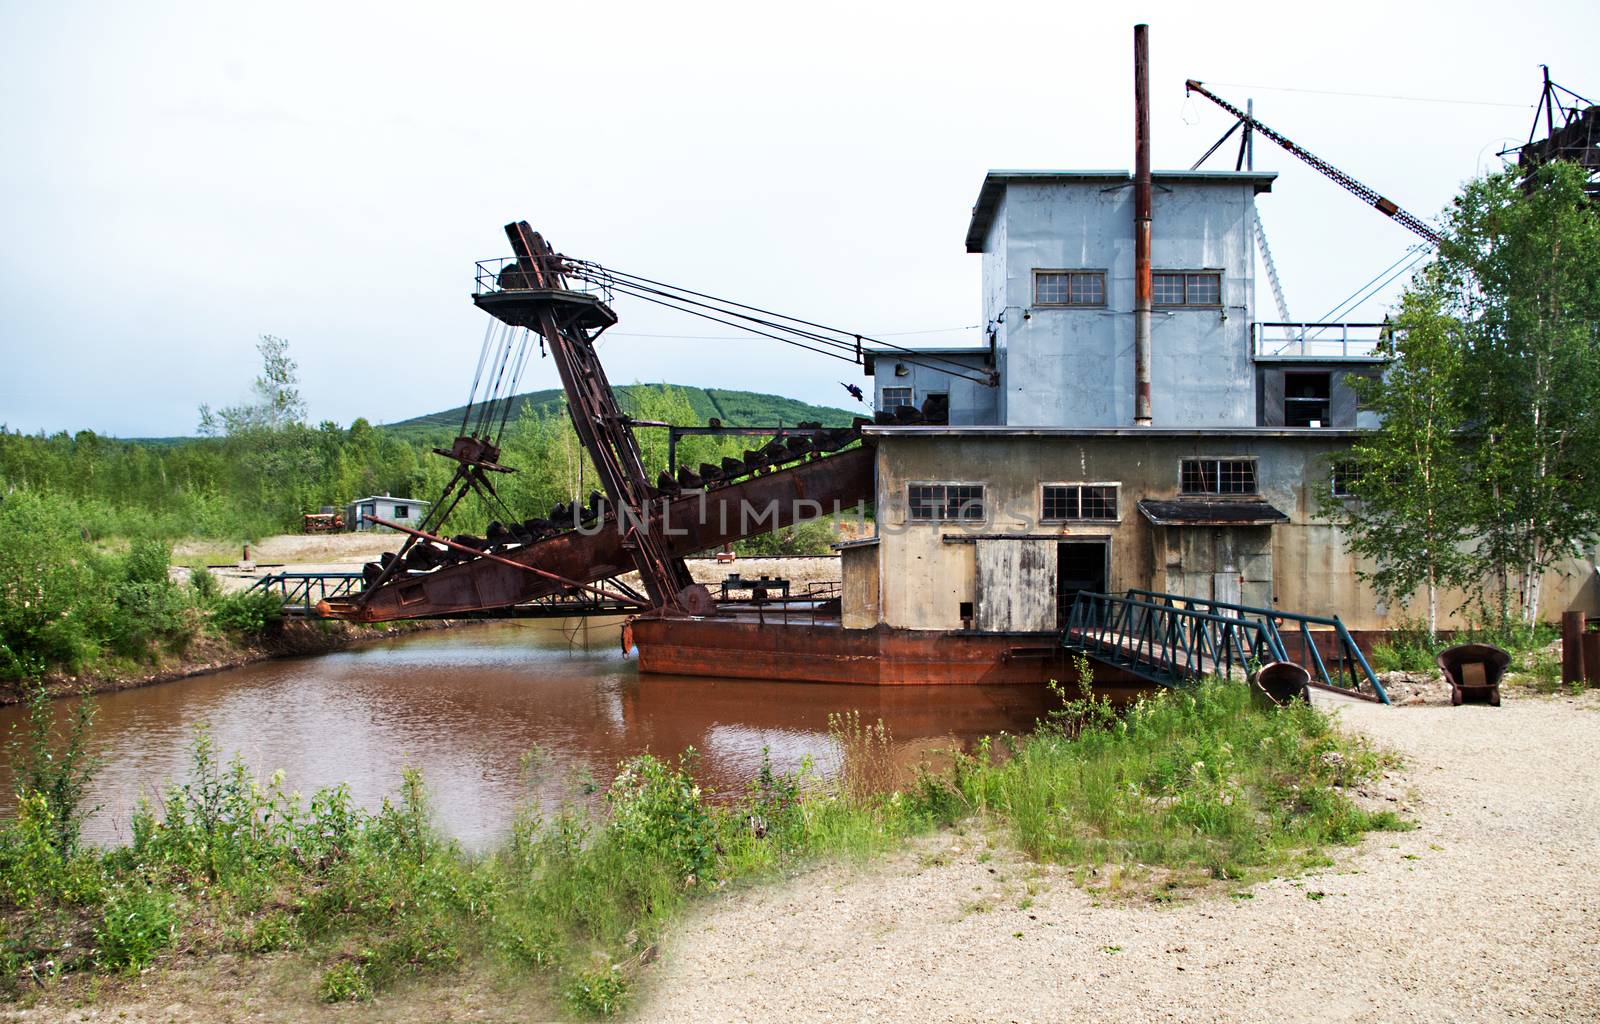 Gold Dredge in an exhibition in Alaska 